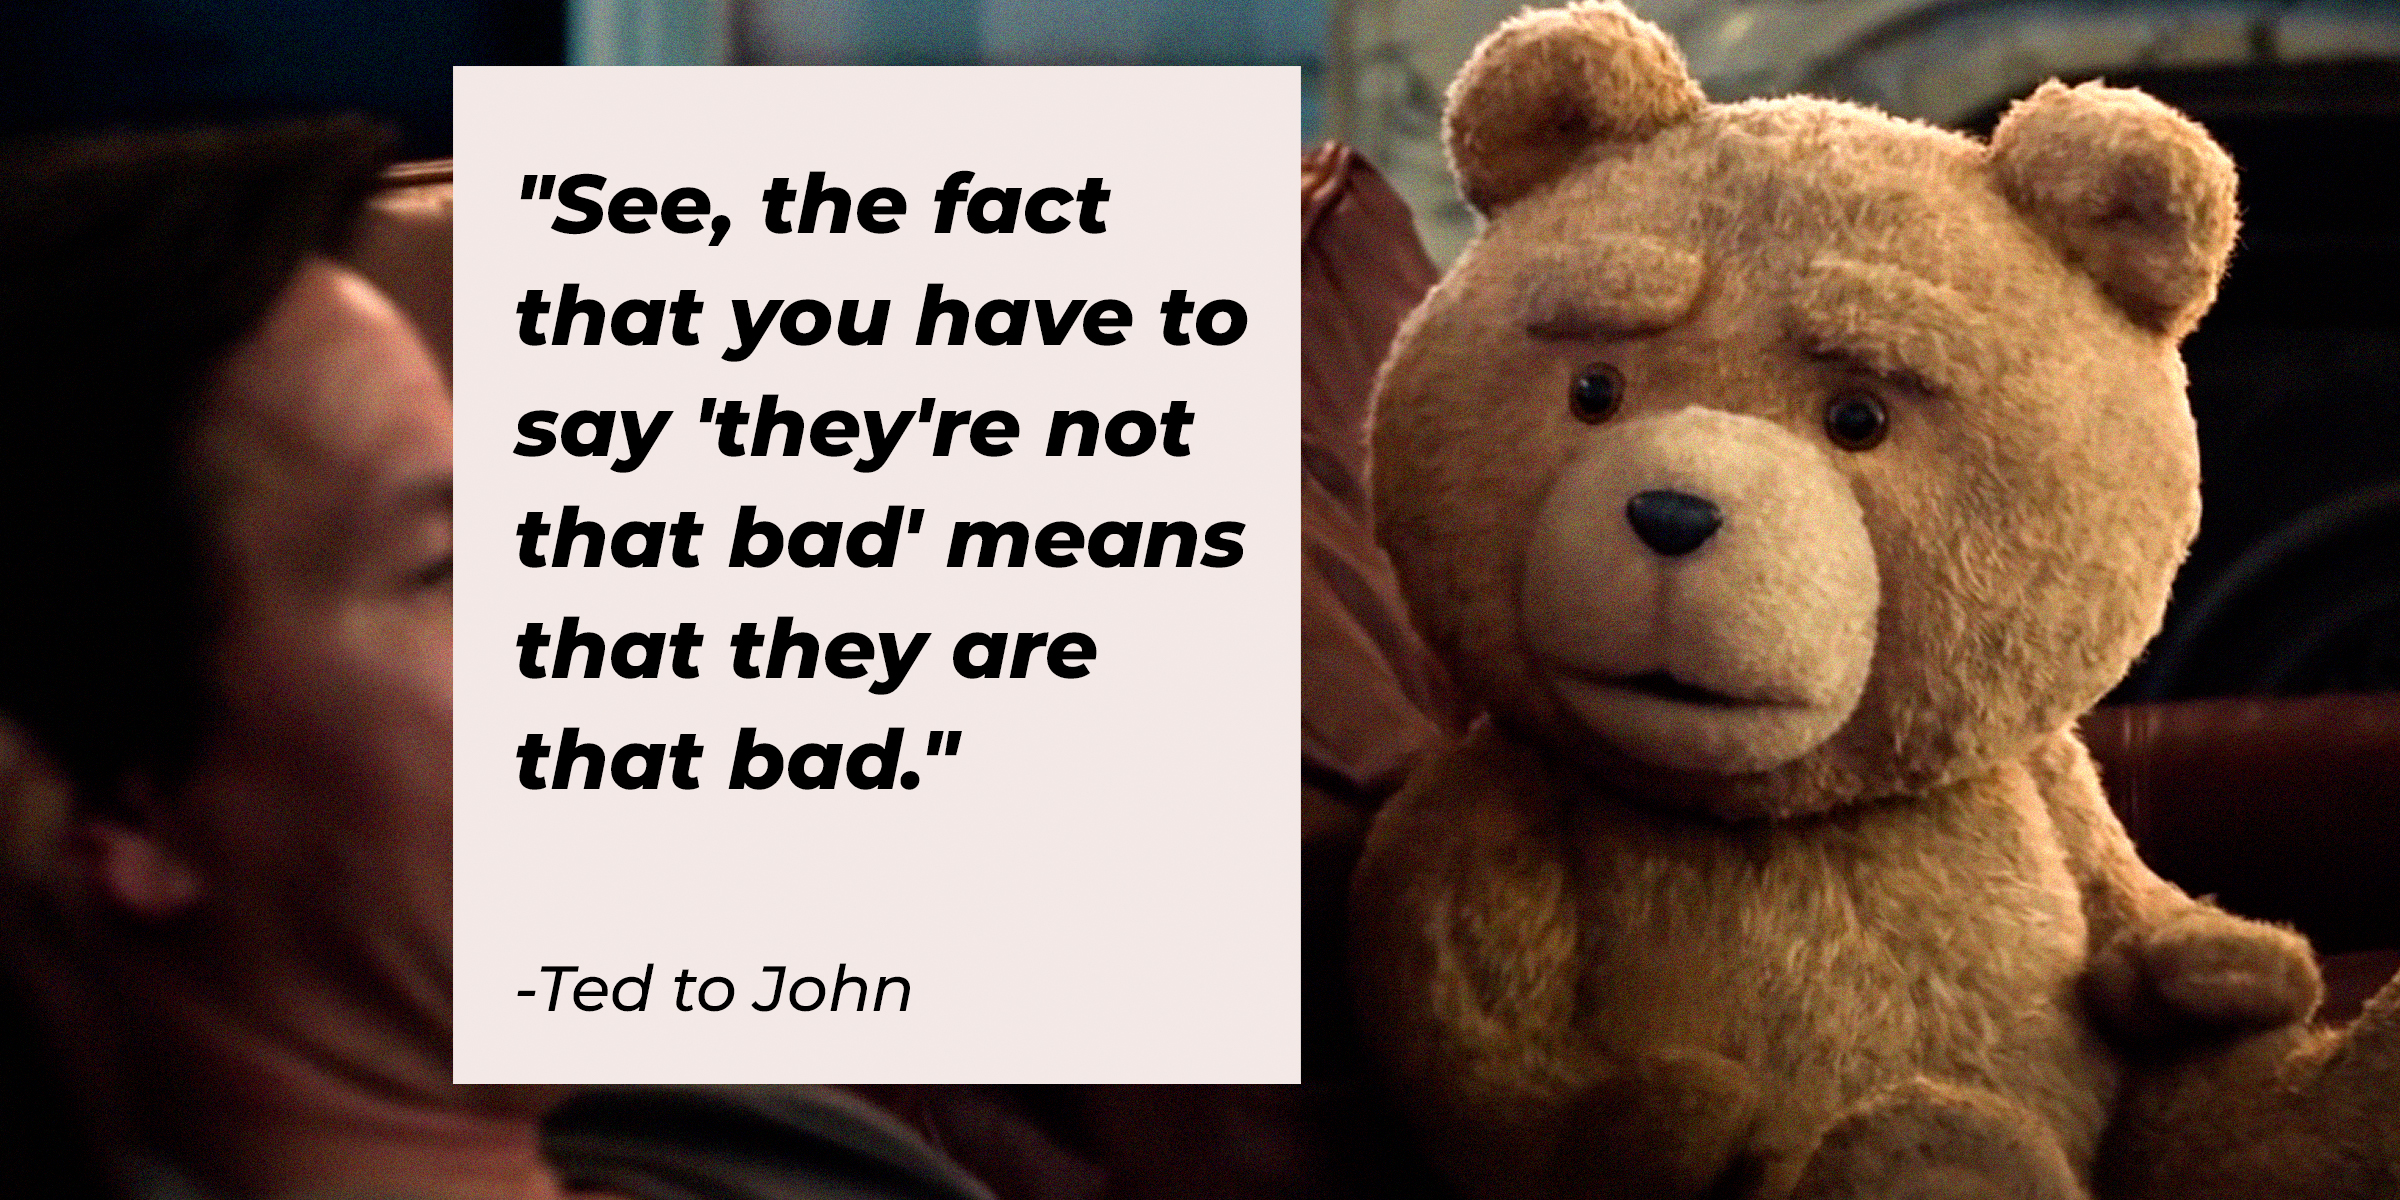 An image of Ted with his quote to John: "See, the fact that you have to say 'they're not that bad' means that they are that bad." | Source: facebook.com/tedisreal